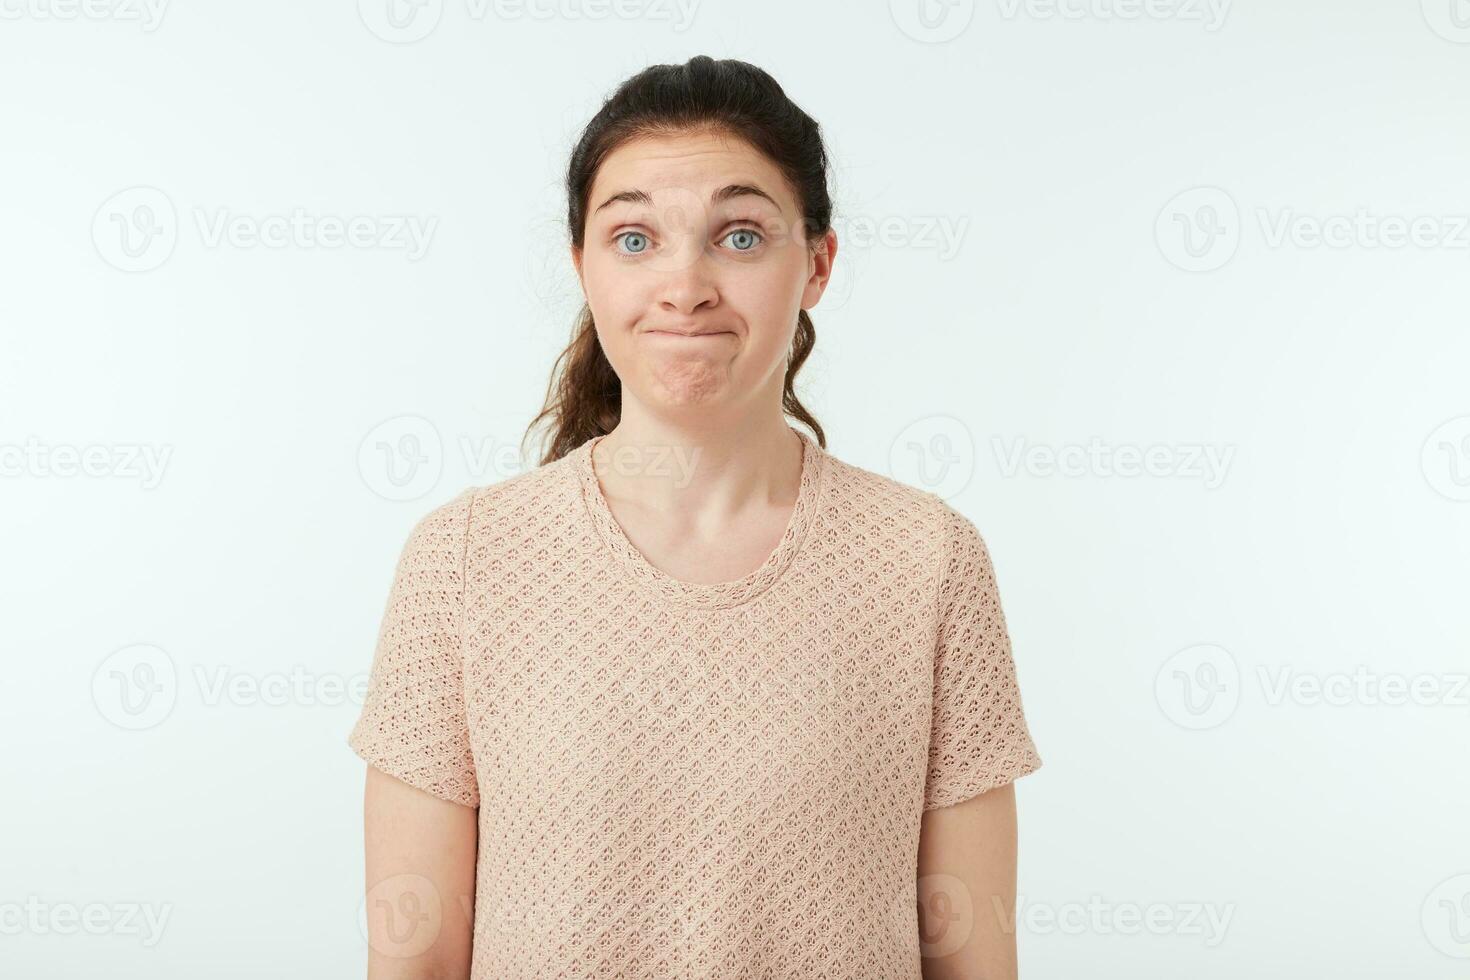 Indoor photo of young dark haired woman with natural makeup making bewildered face while looking at camera while standing against white background in casual wear